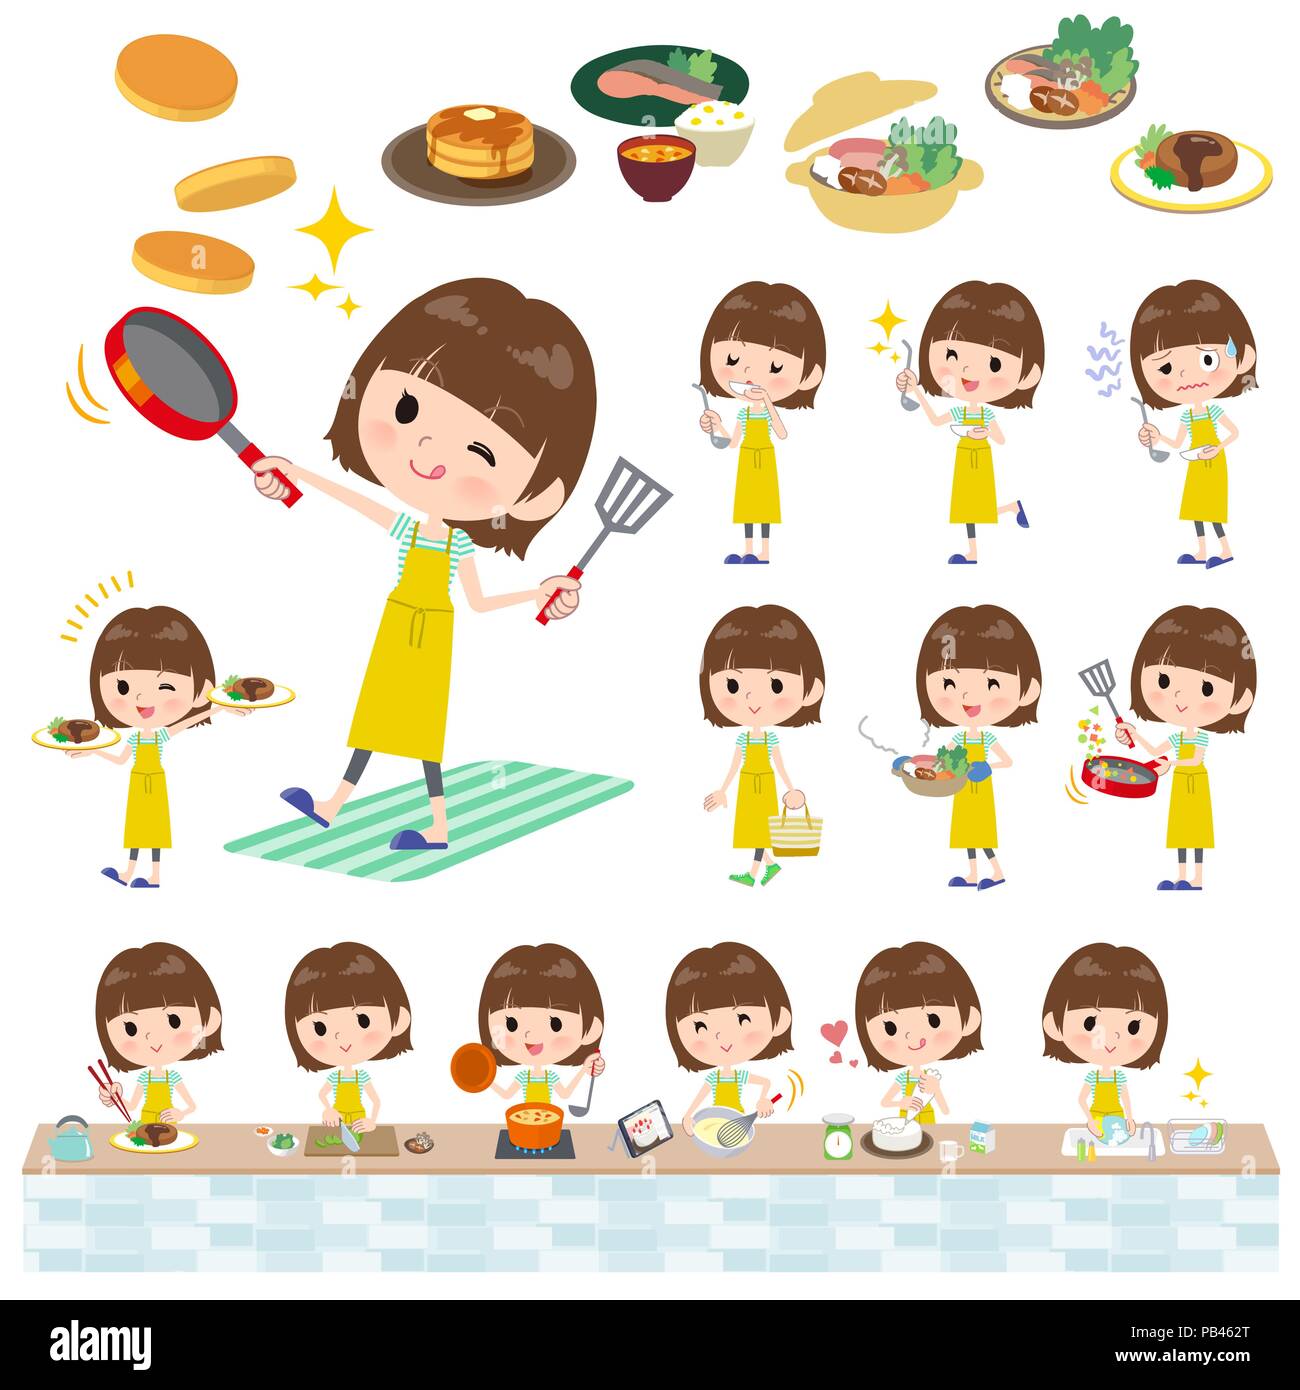 A set of women about cooking.There are actions that are cooking in various ways in the kitchen.It's vector art so it's easy to edit. Stock Vector